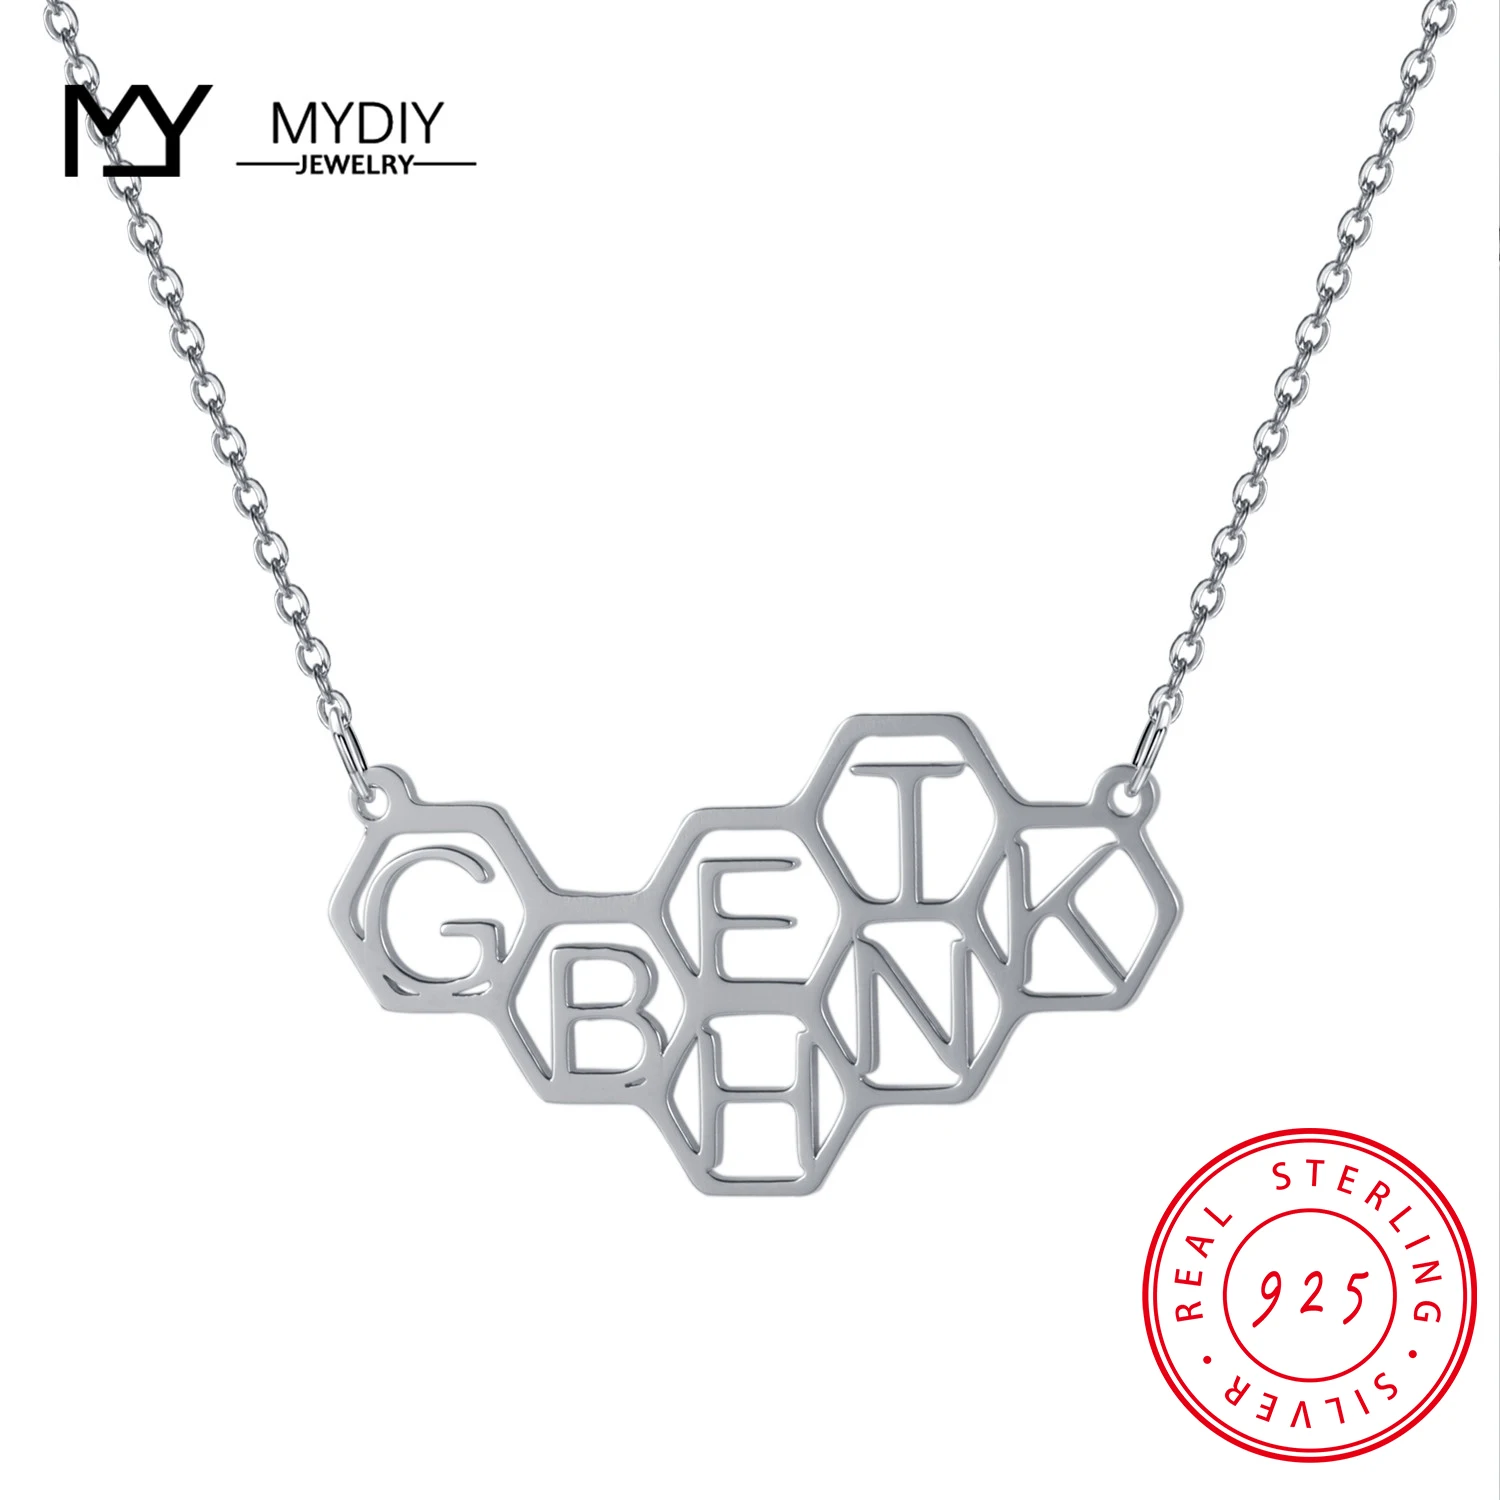 925 Sterling Silver Custom LOGO Name Necklace Fashion Chain Necklace Jewelry Custom Name For Best Friend MYDIY 2021 Trend